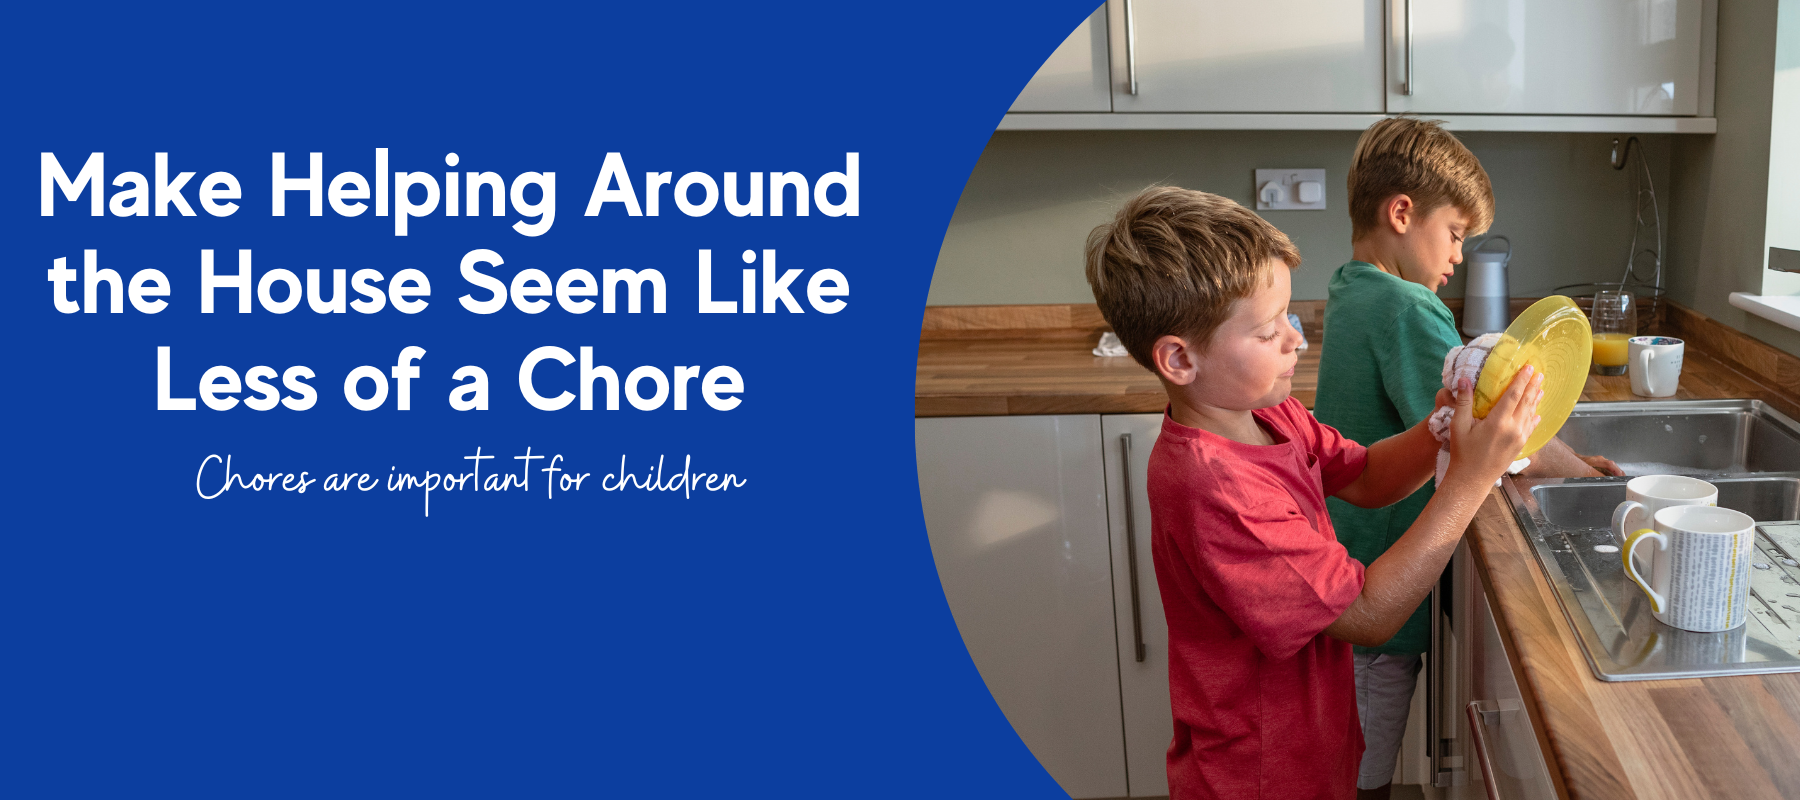 Make Helping Around the House Seem Like Less of a Chore